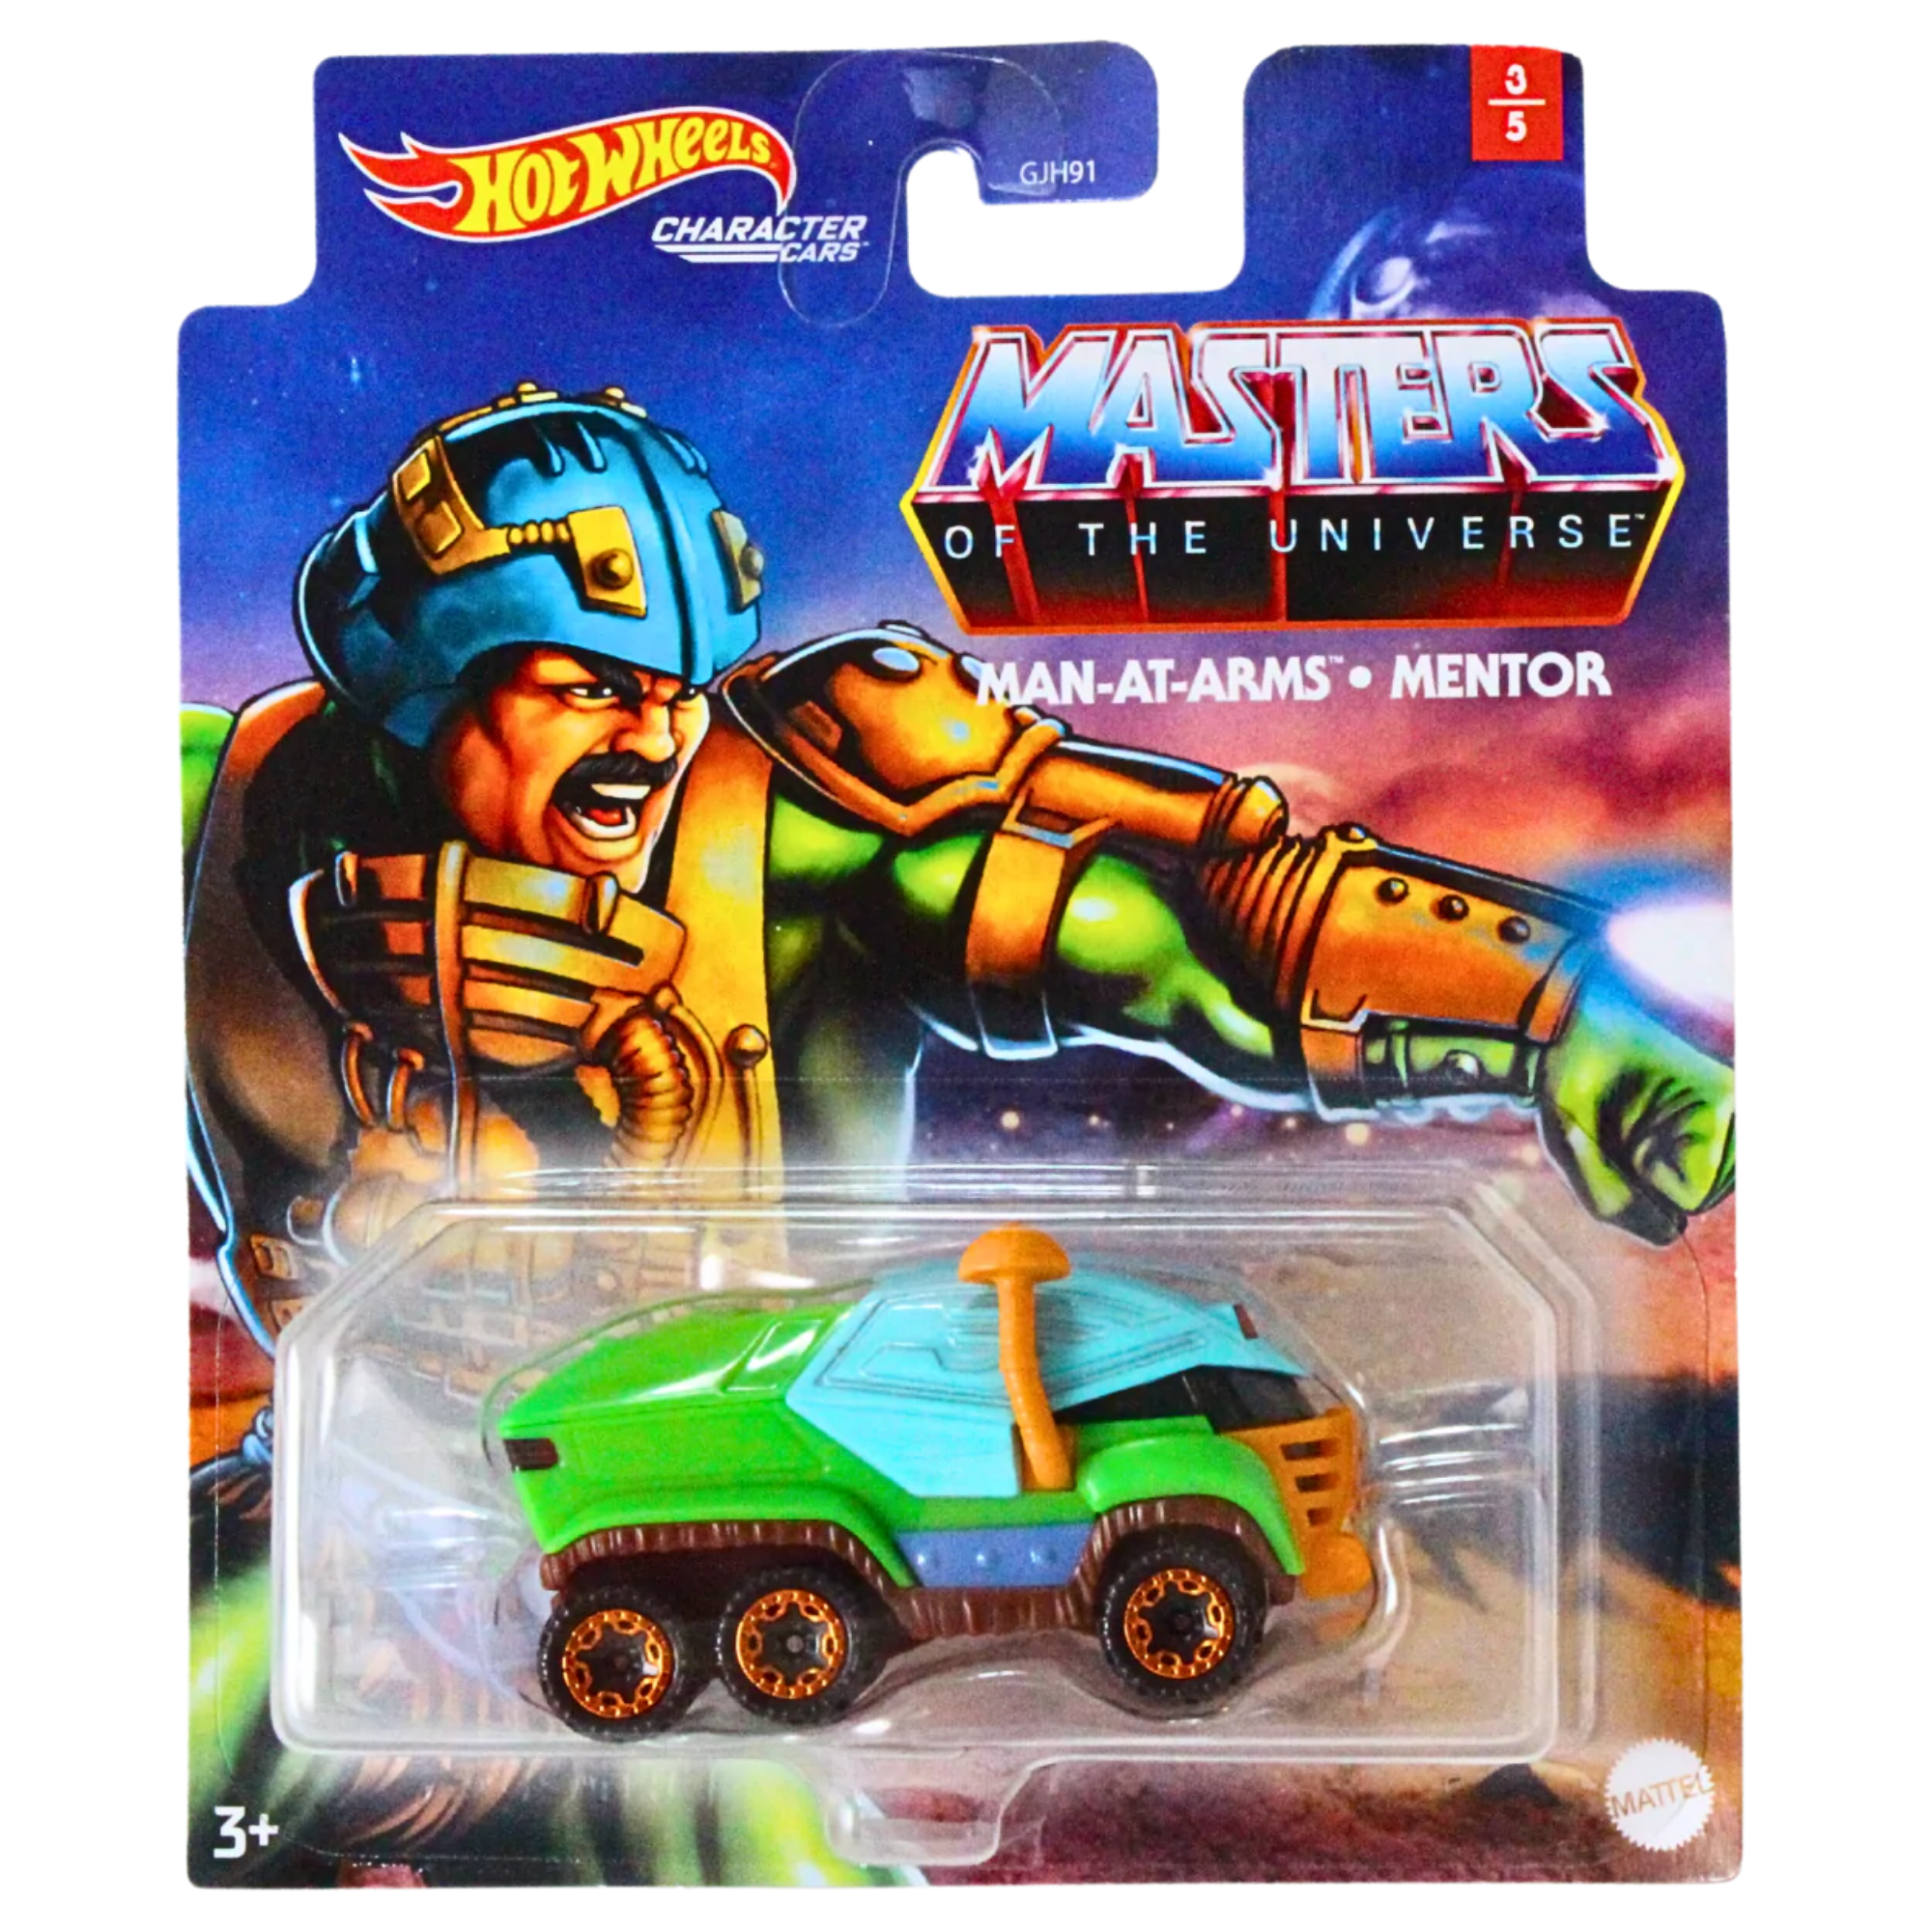 Character Cars Hot Wheels Masters of The Universe Die-cast 1:64 Scale Vehicle Car - Man At Arms Mentor 3/5 - Toptoys2u